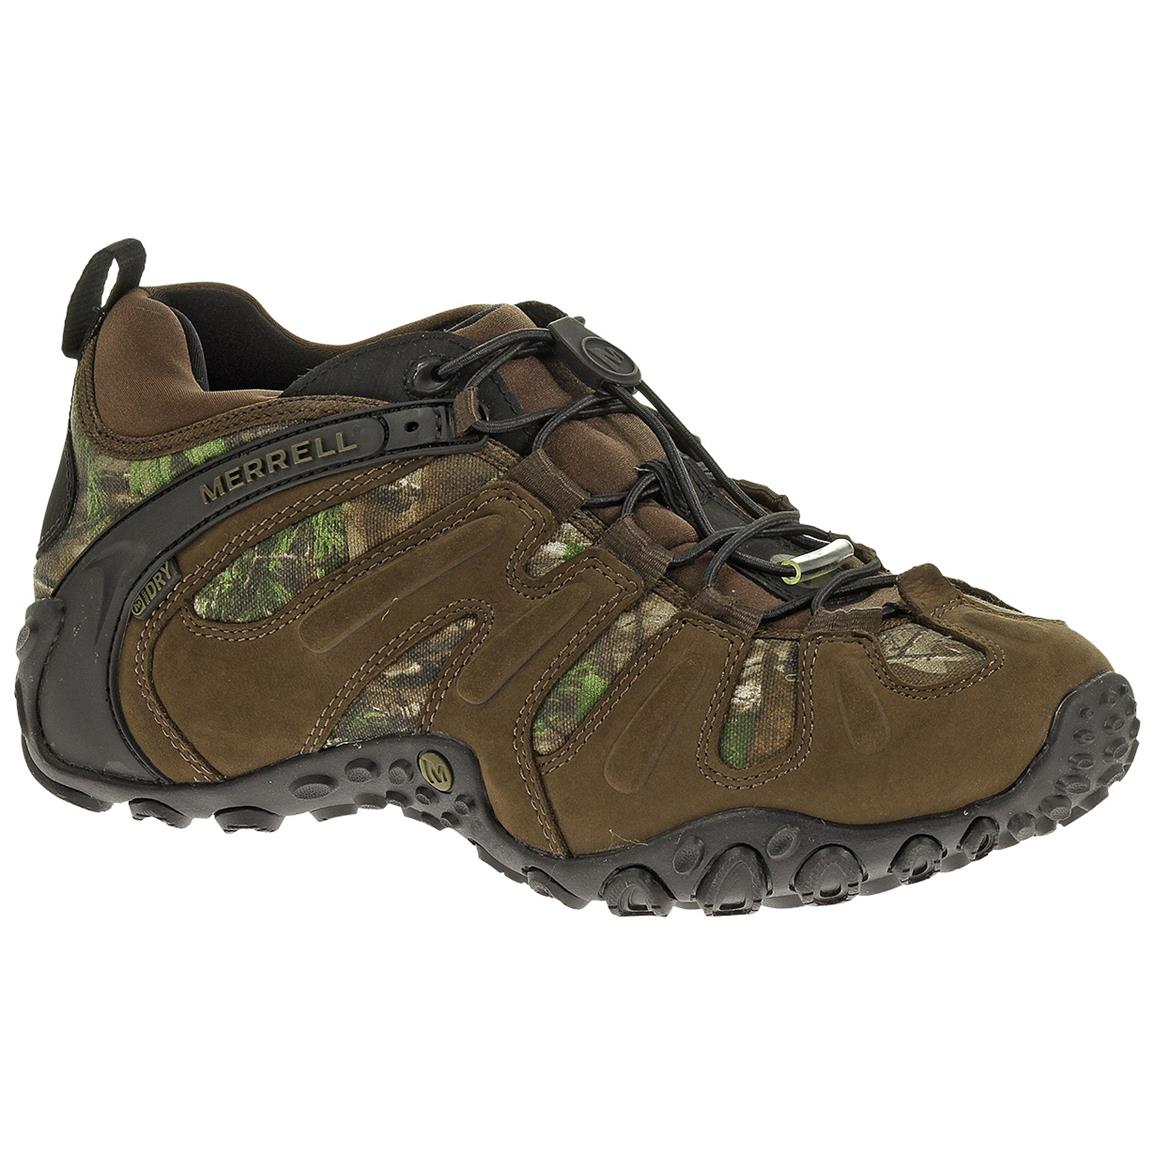 Merrell Chameleon Prime Stretch Waterproof Shoes - 617434, Hiking Boots ...